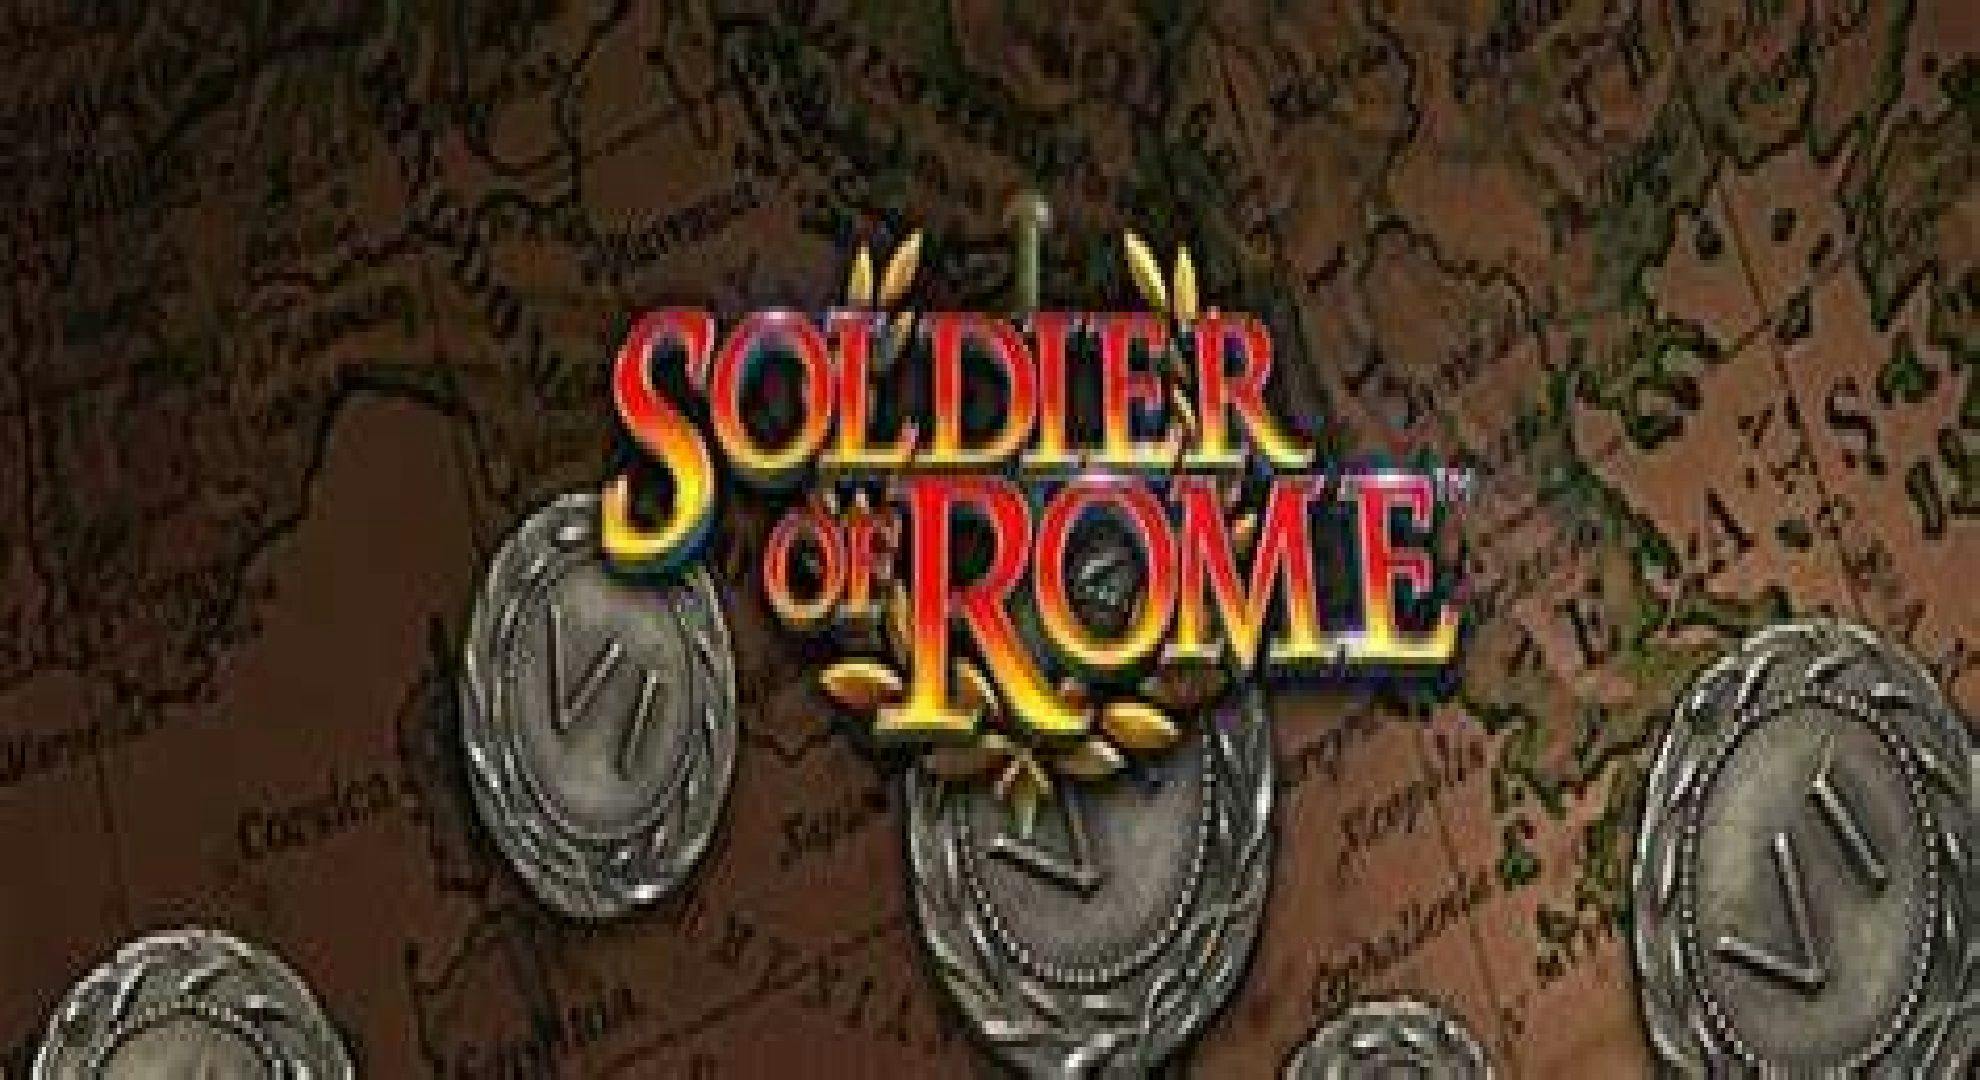 Soldier Of Rome Slot Online Free Play